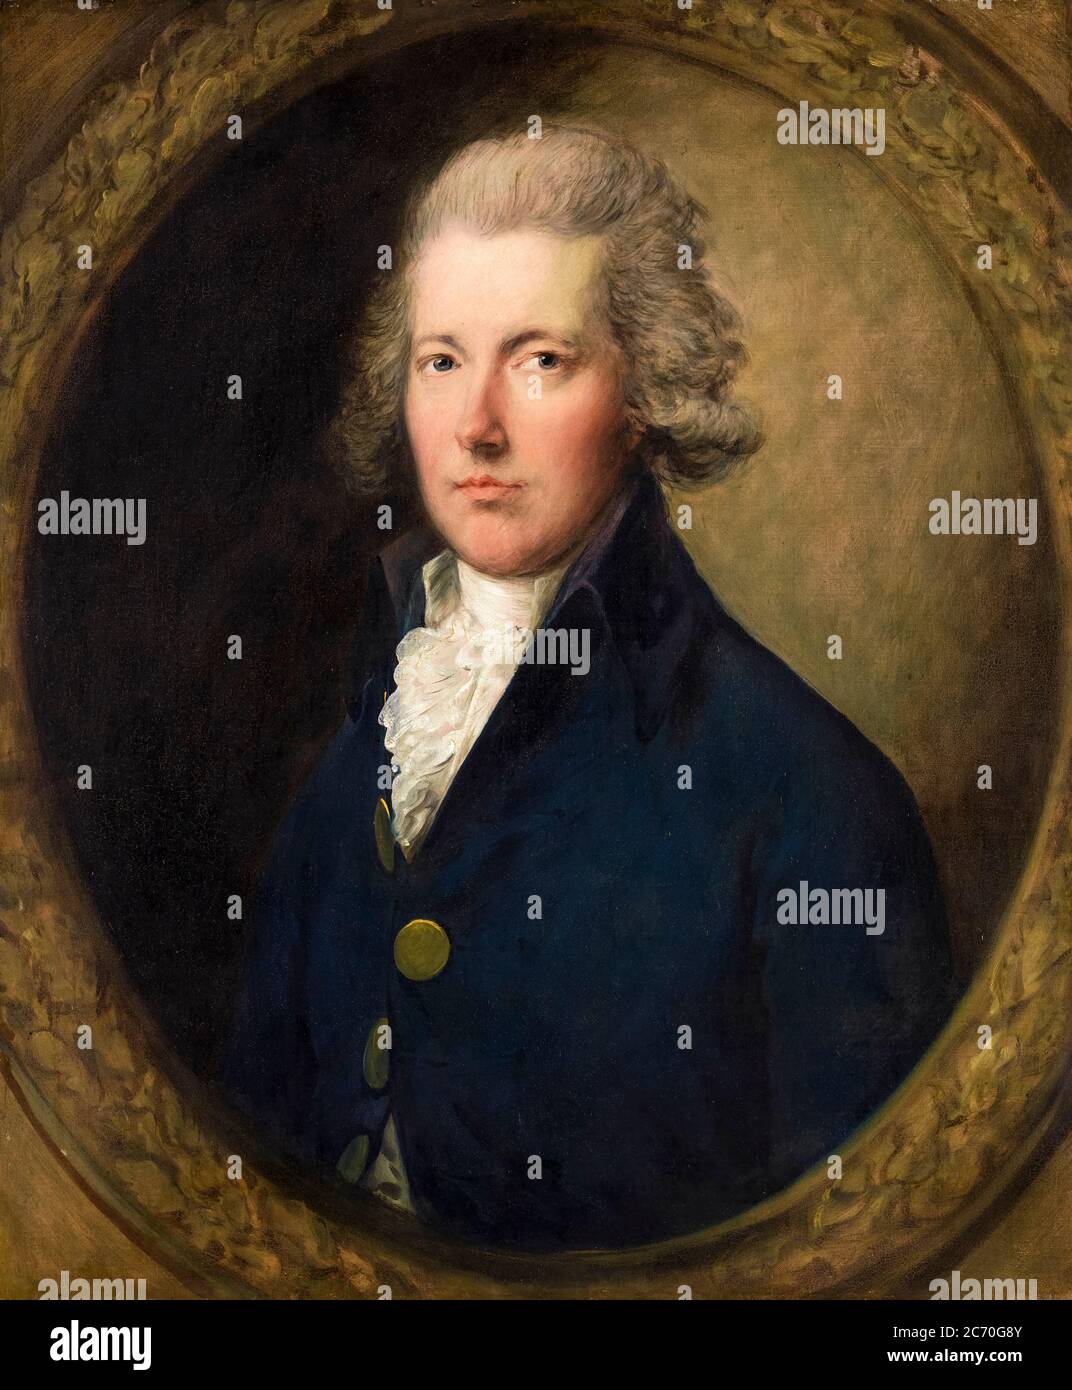 William Pitt the Younger (1759-1806), British Prime Minister, portrait painting by Studio of Thomas Gainsborough, 1787-1789 Stock Photo